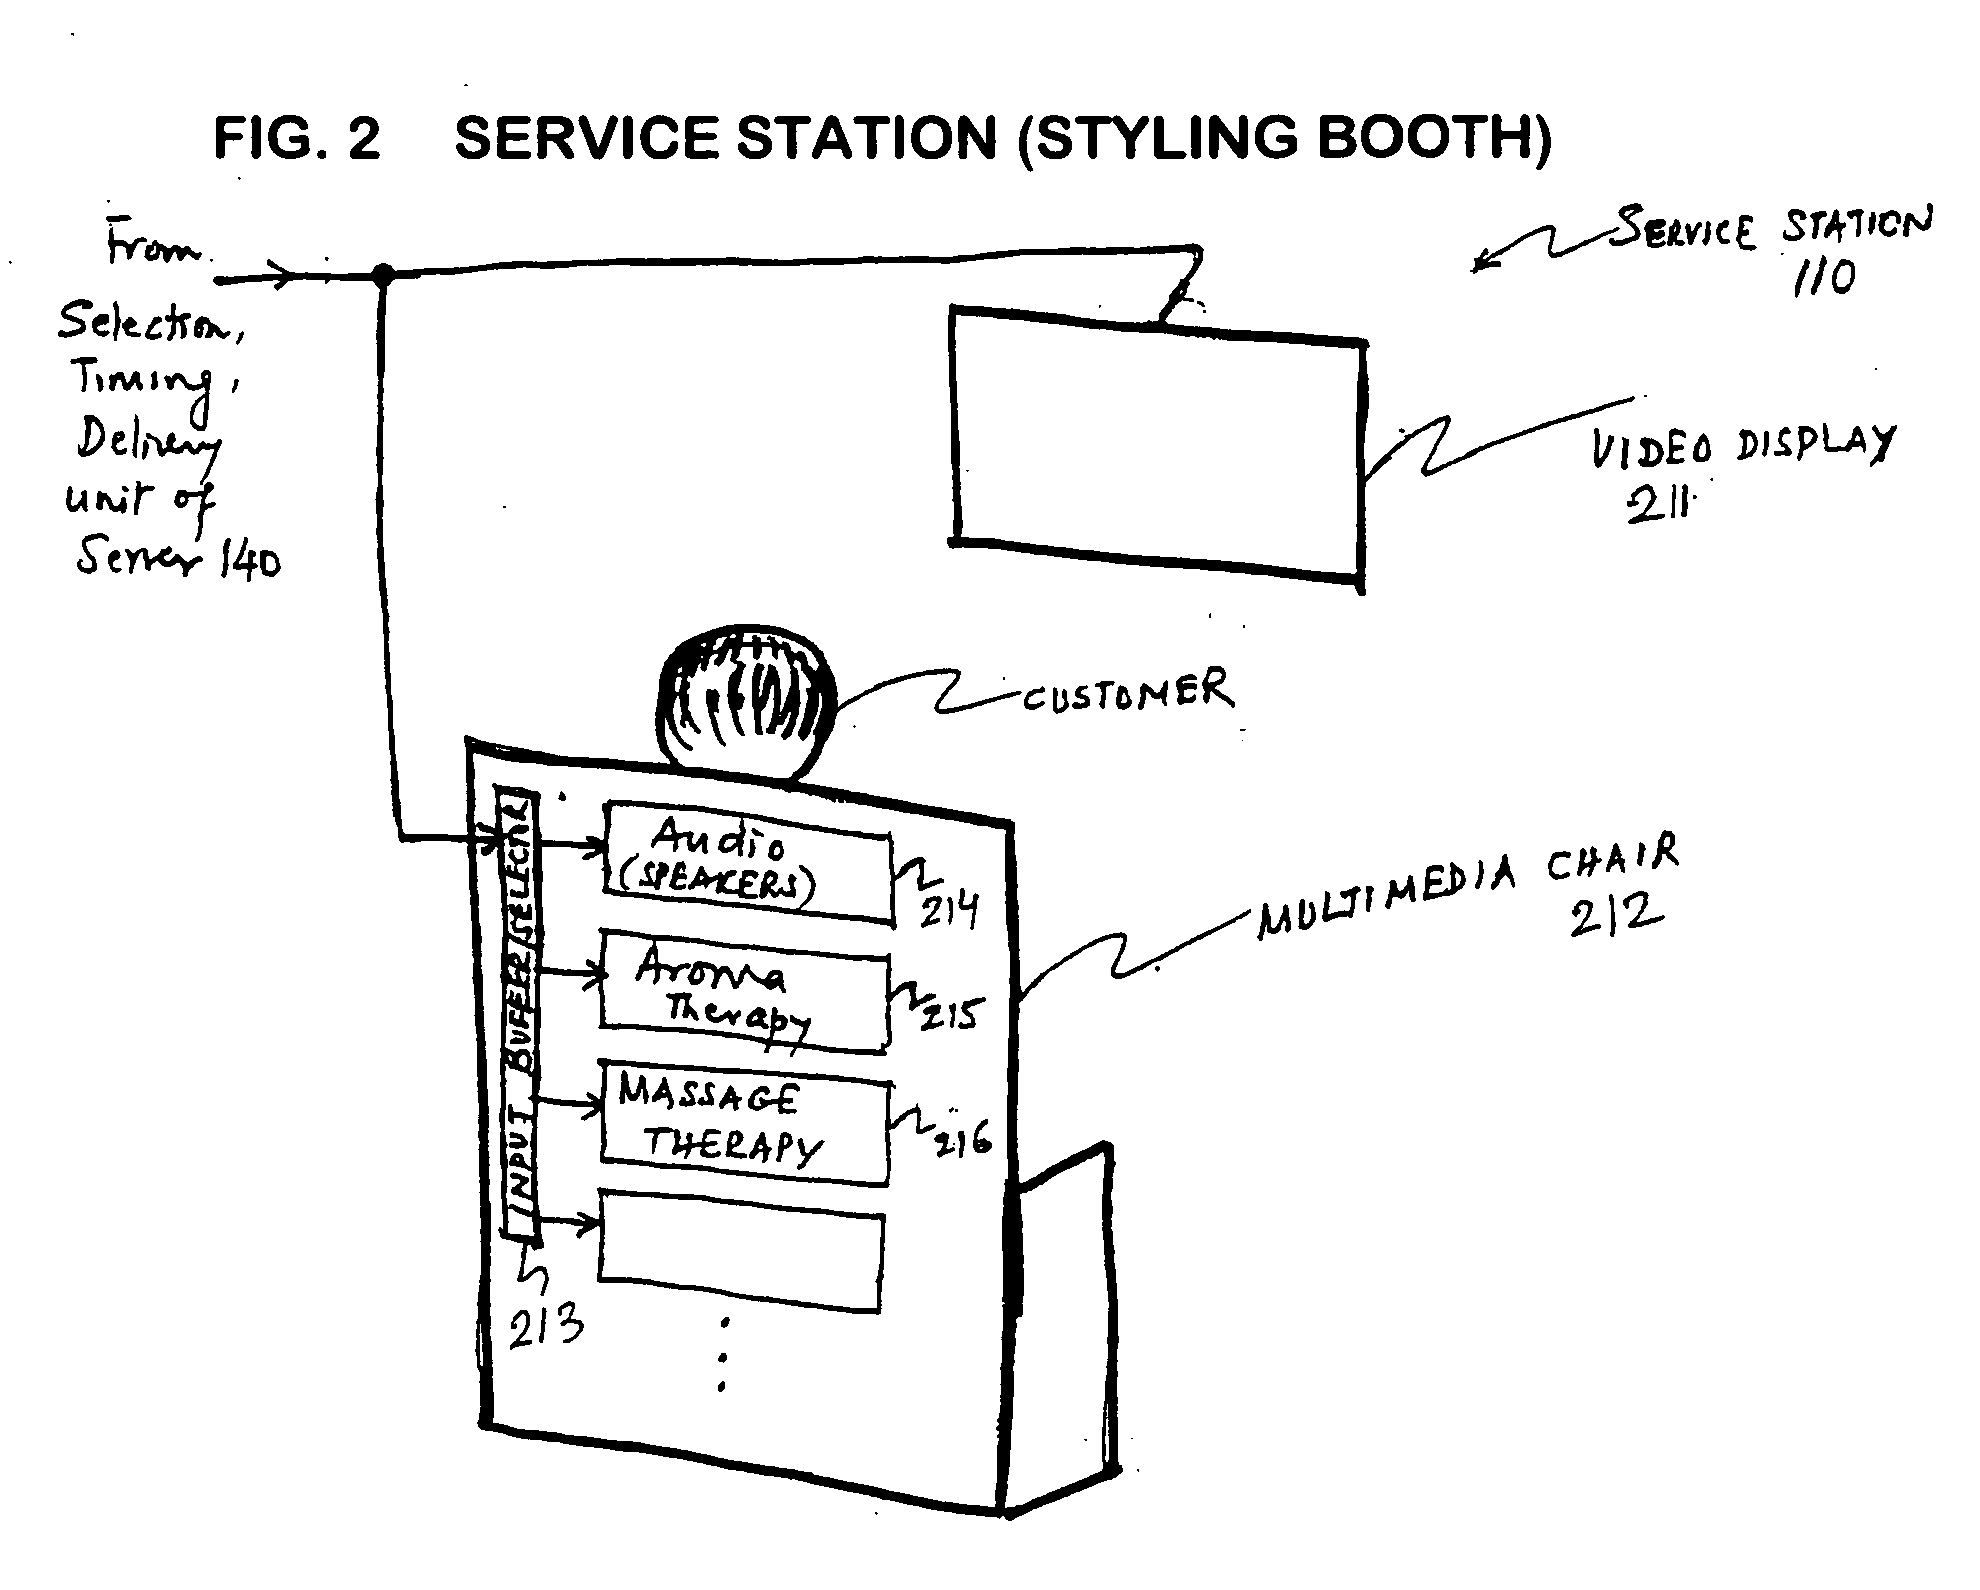 Method and apparatus for information storage, customization and delivery at a service-delivery site such as a beauty salon